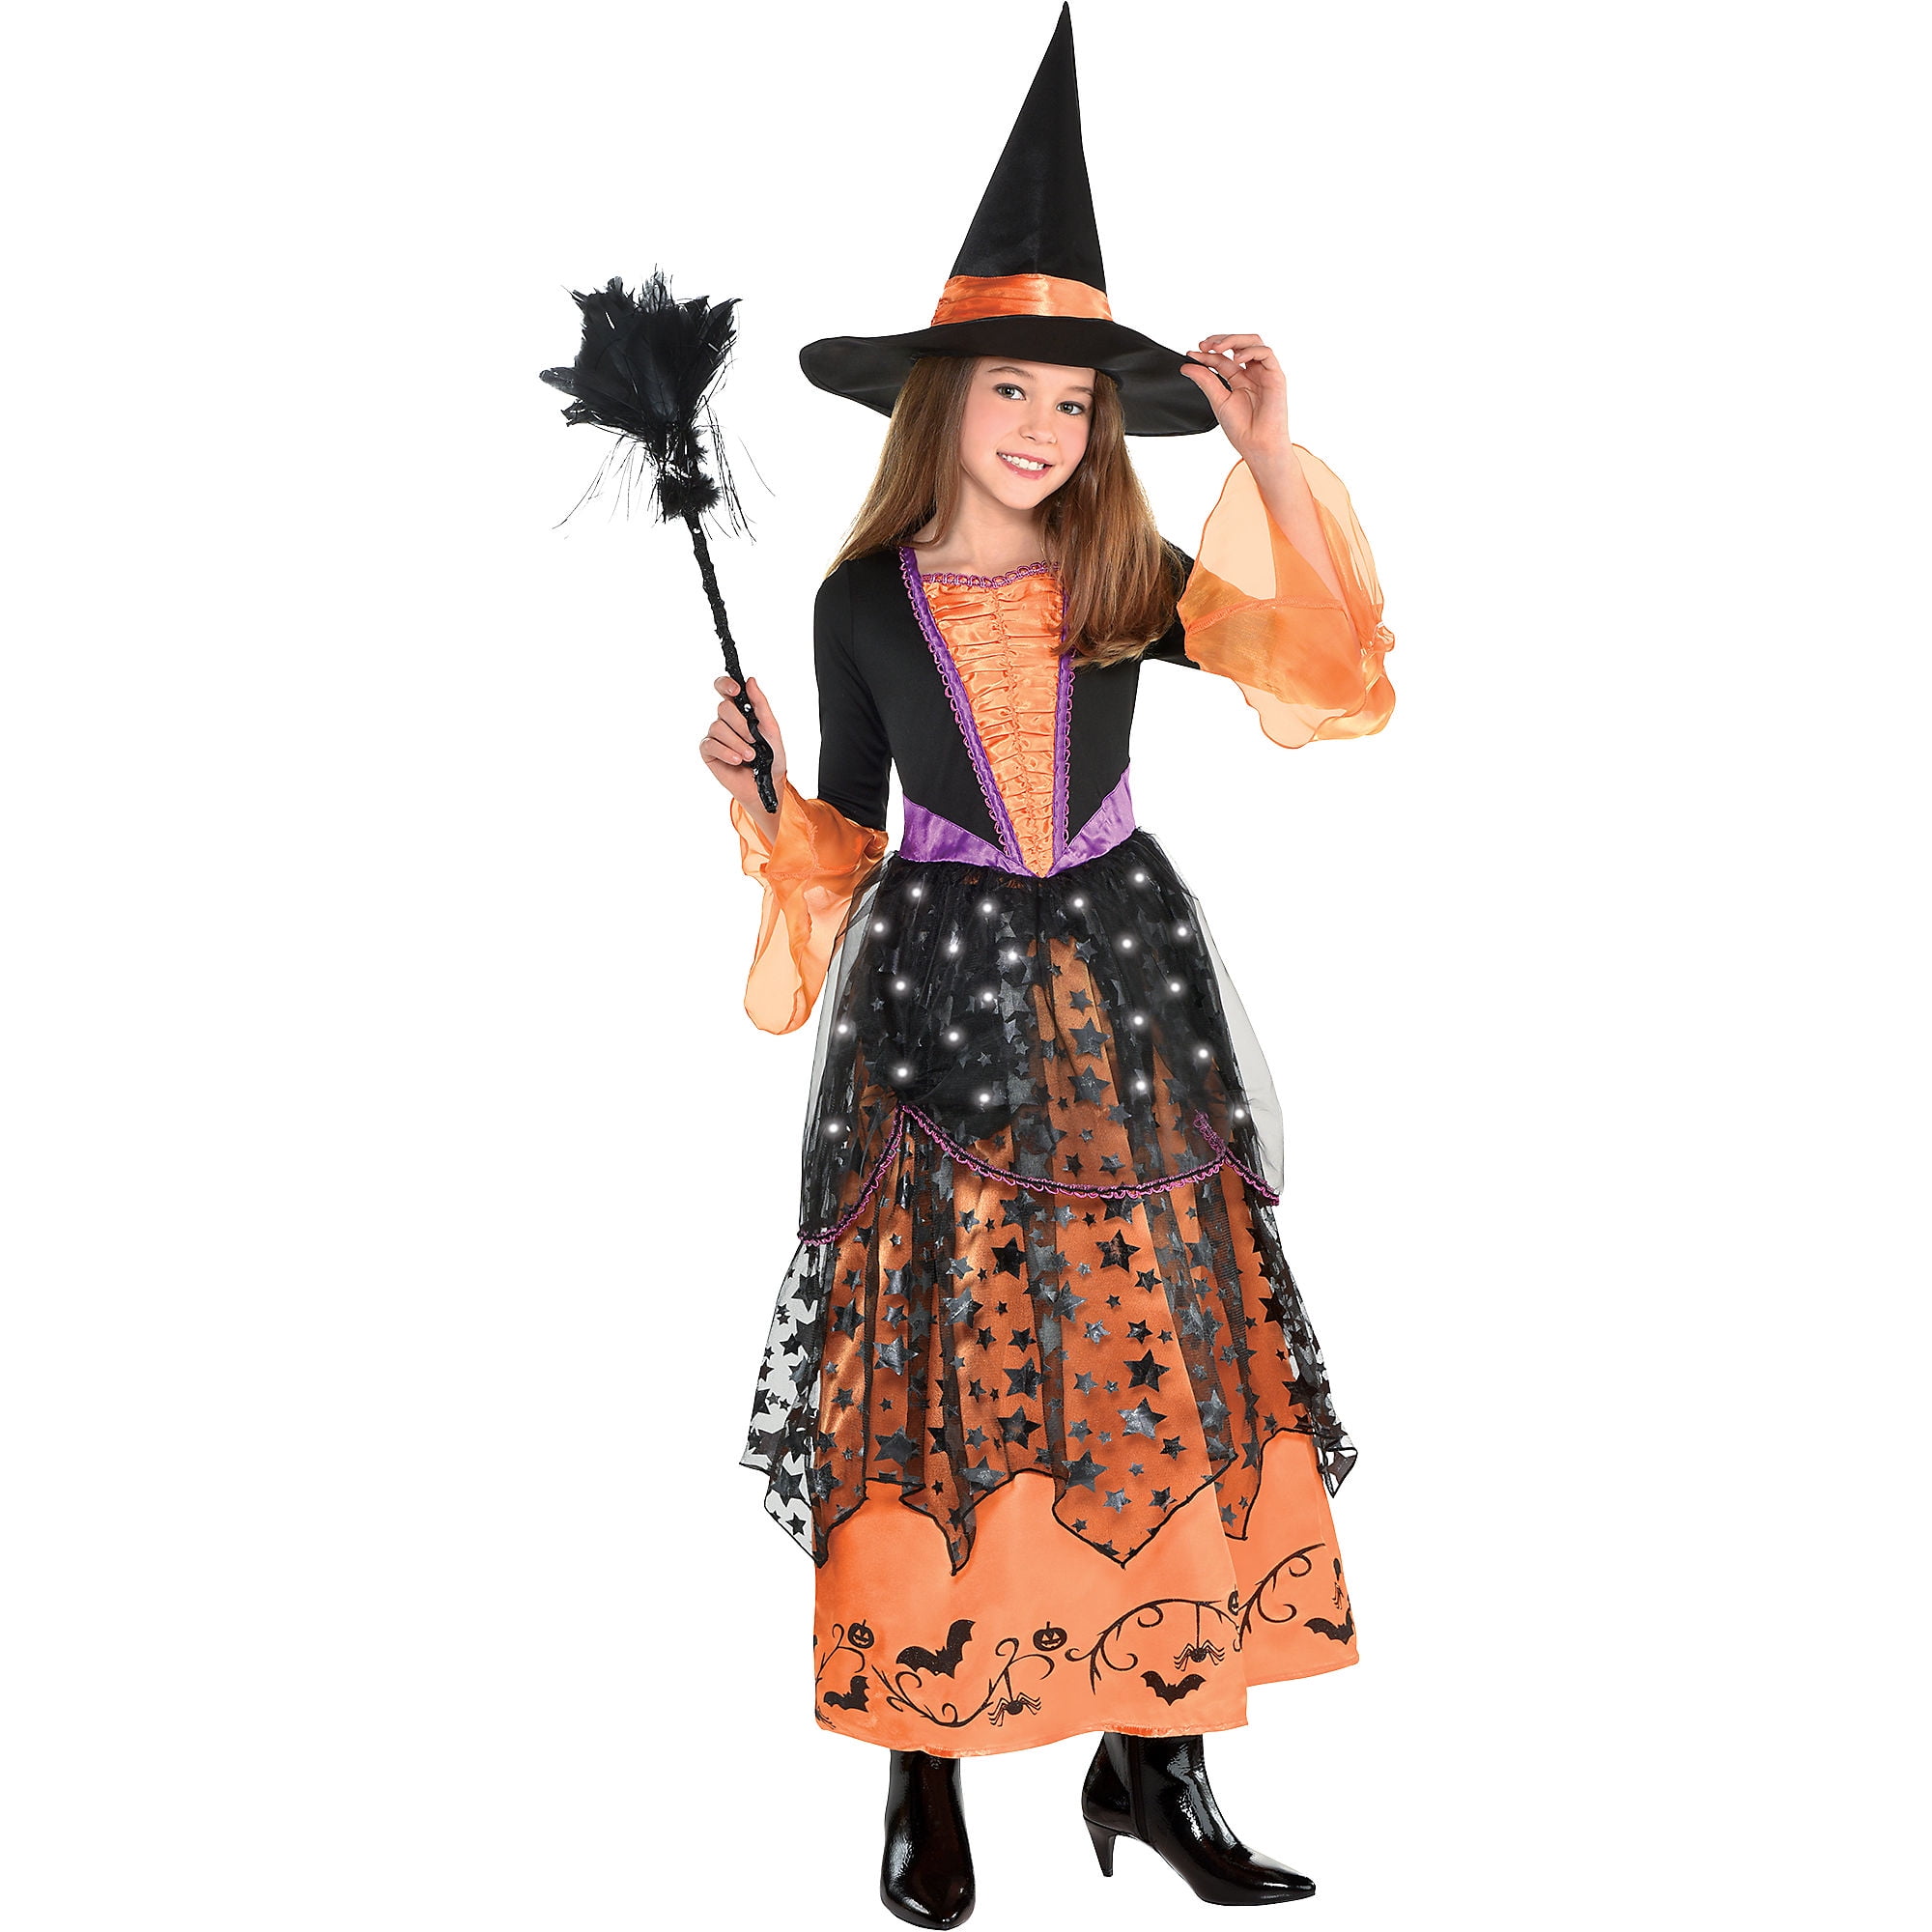 Magic Wand and Bag EOZY Girls Glitter Witch Costume Set Halloween Cosplay Party Dress Up with Hat